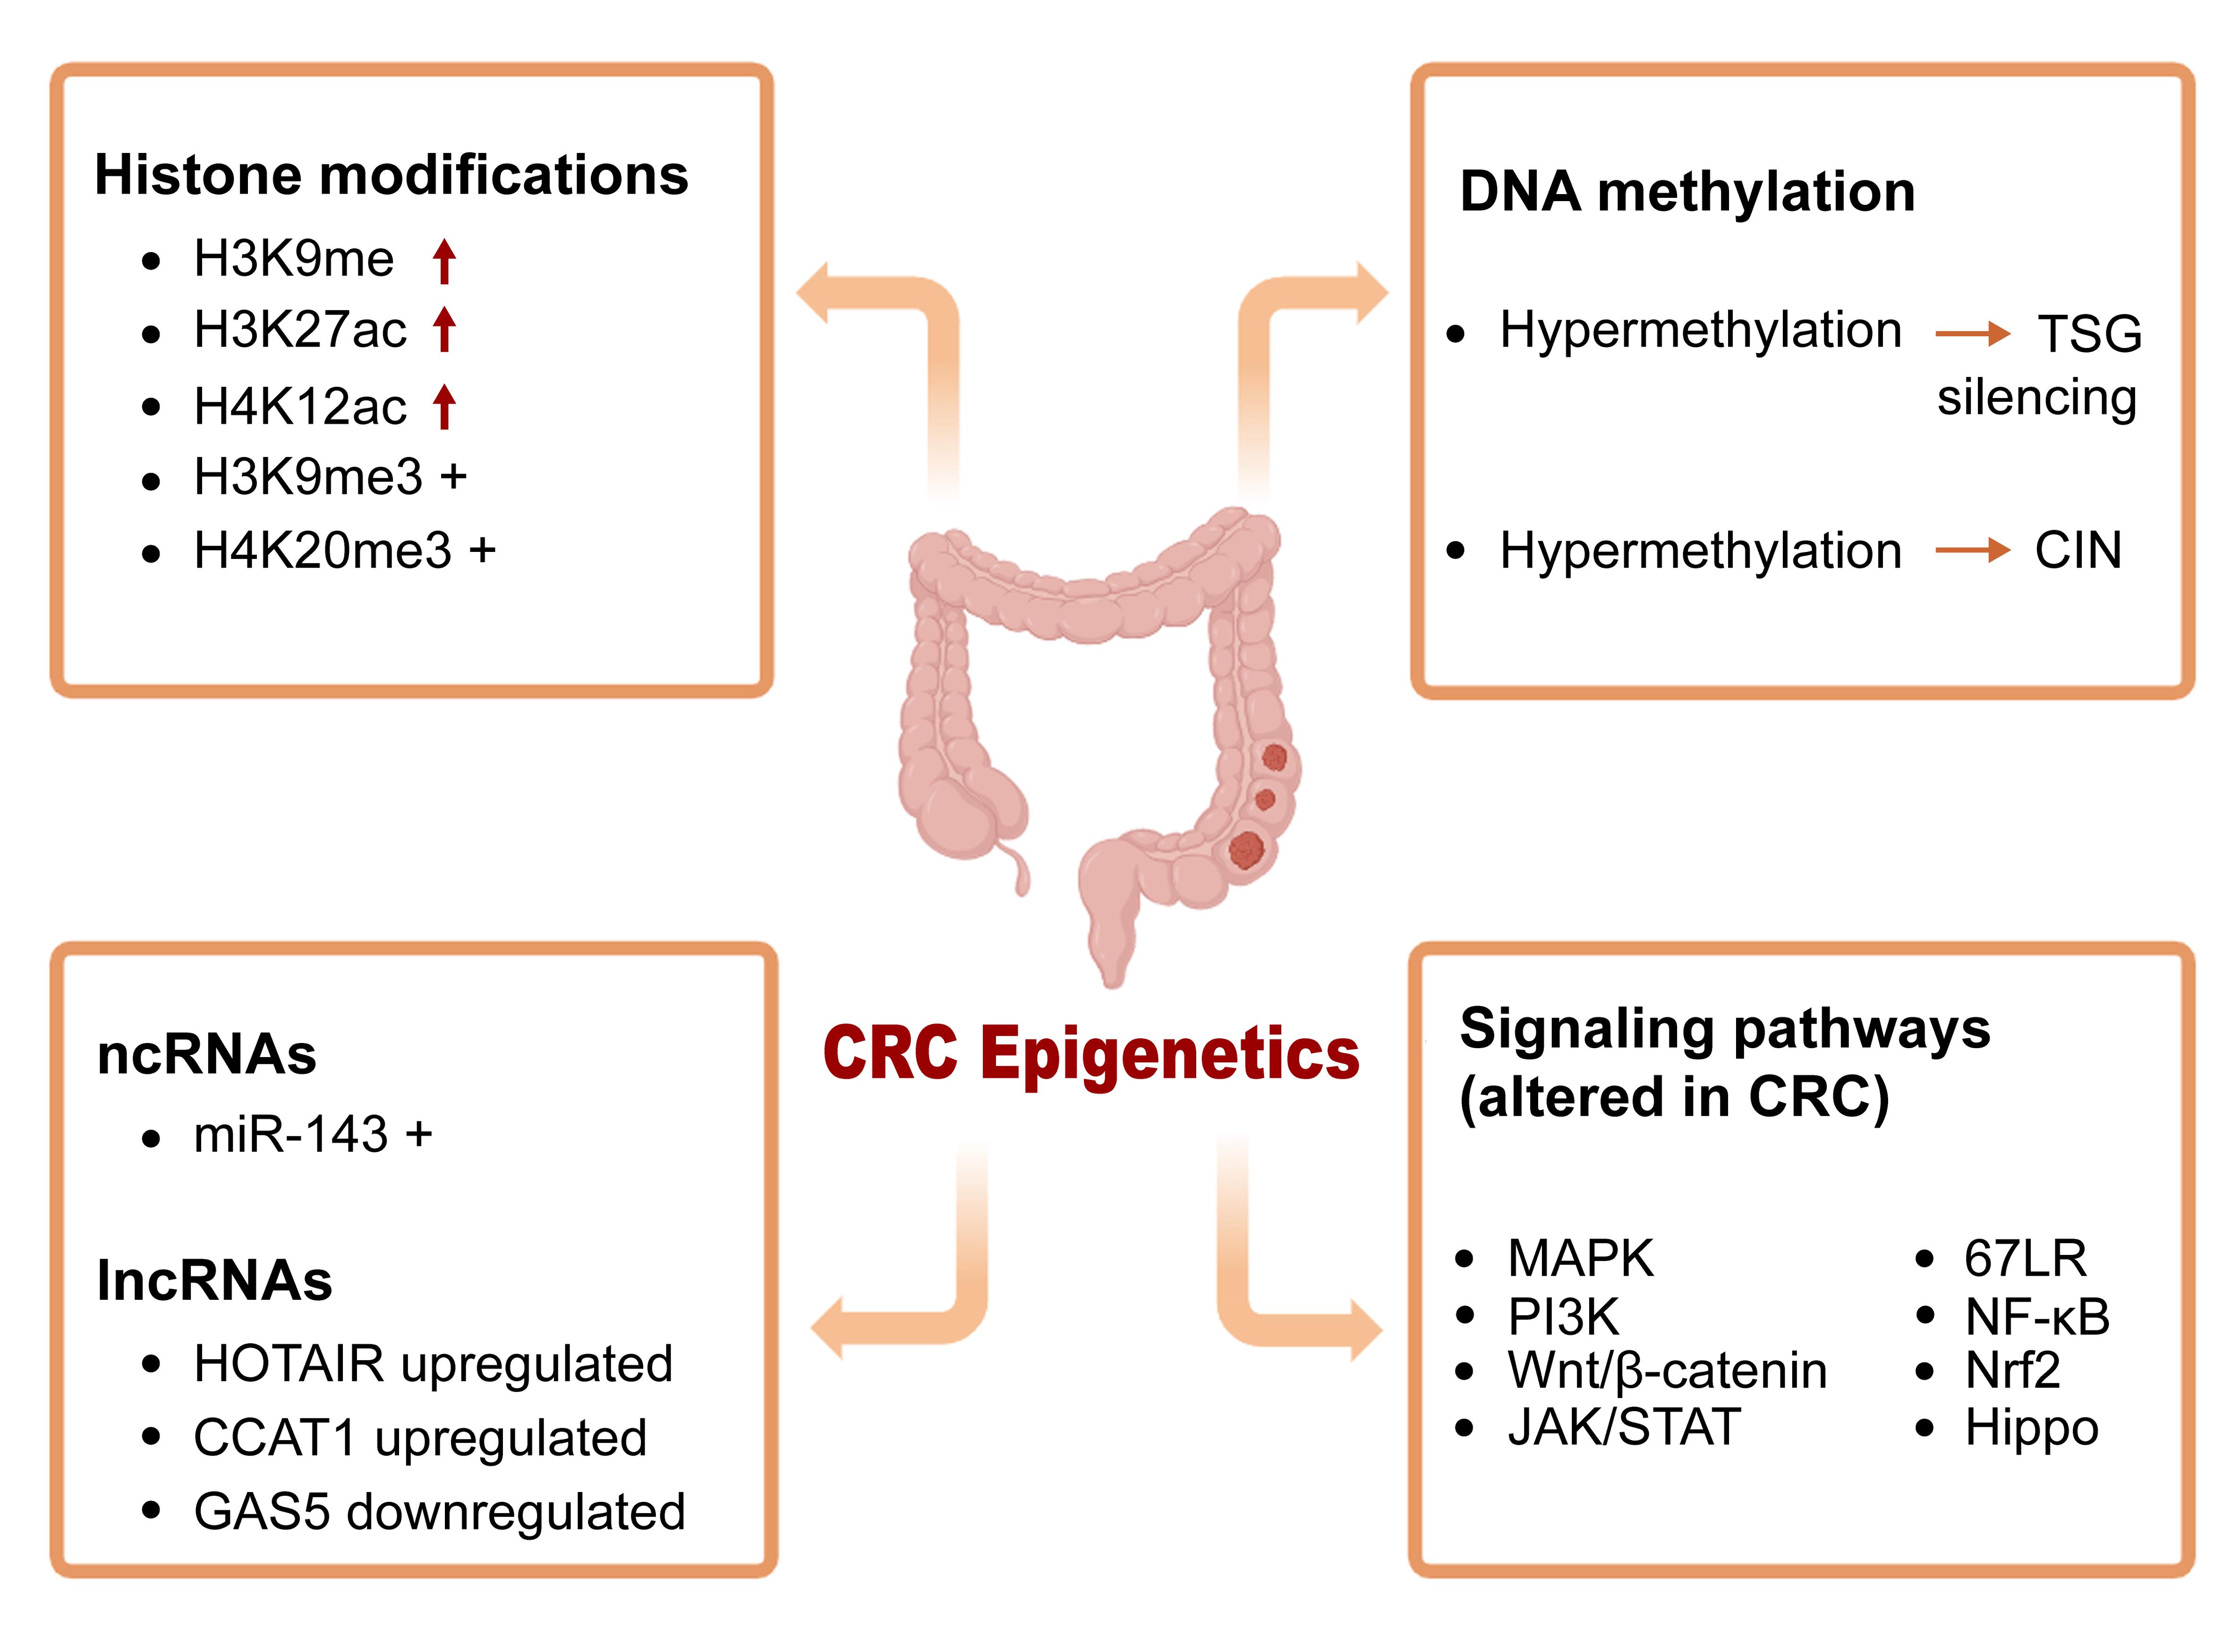 Some epigenetic alterations detected in CRC.